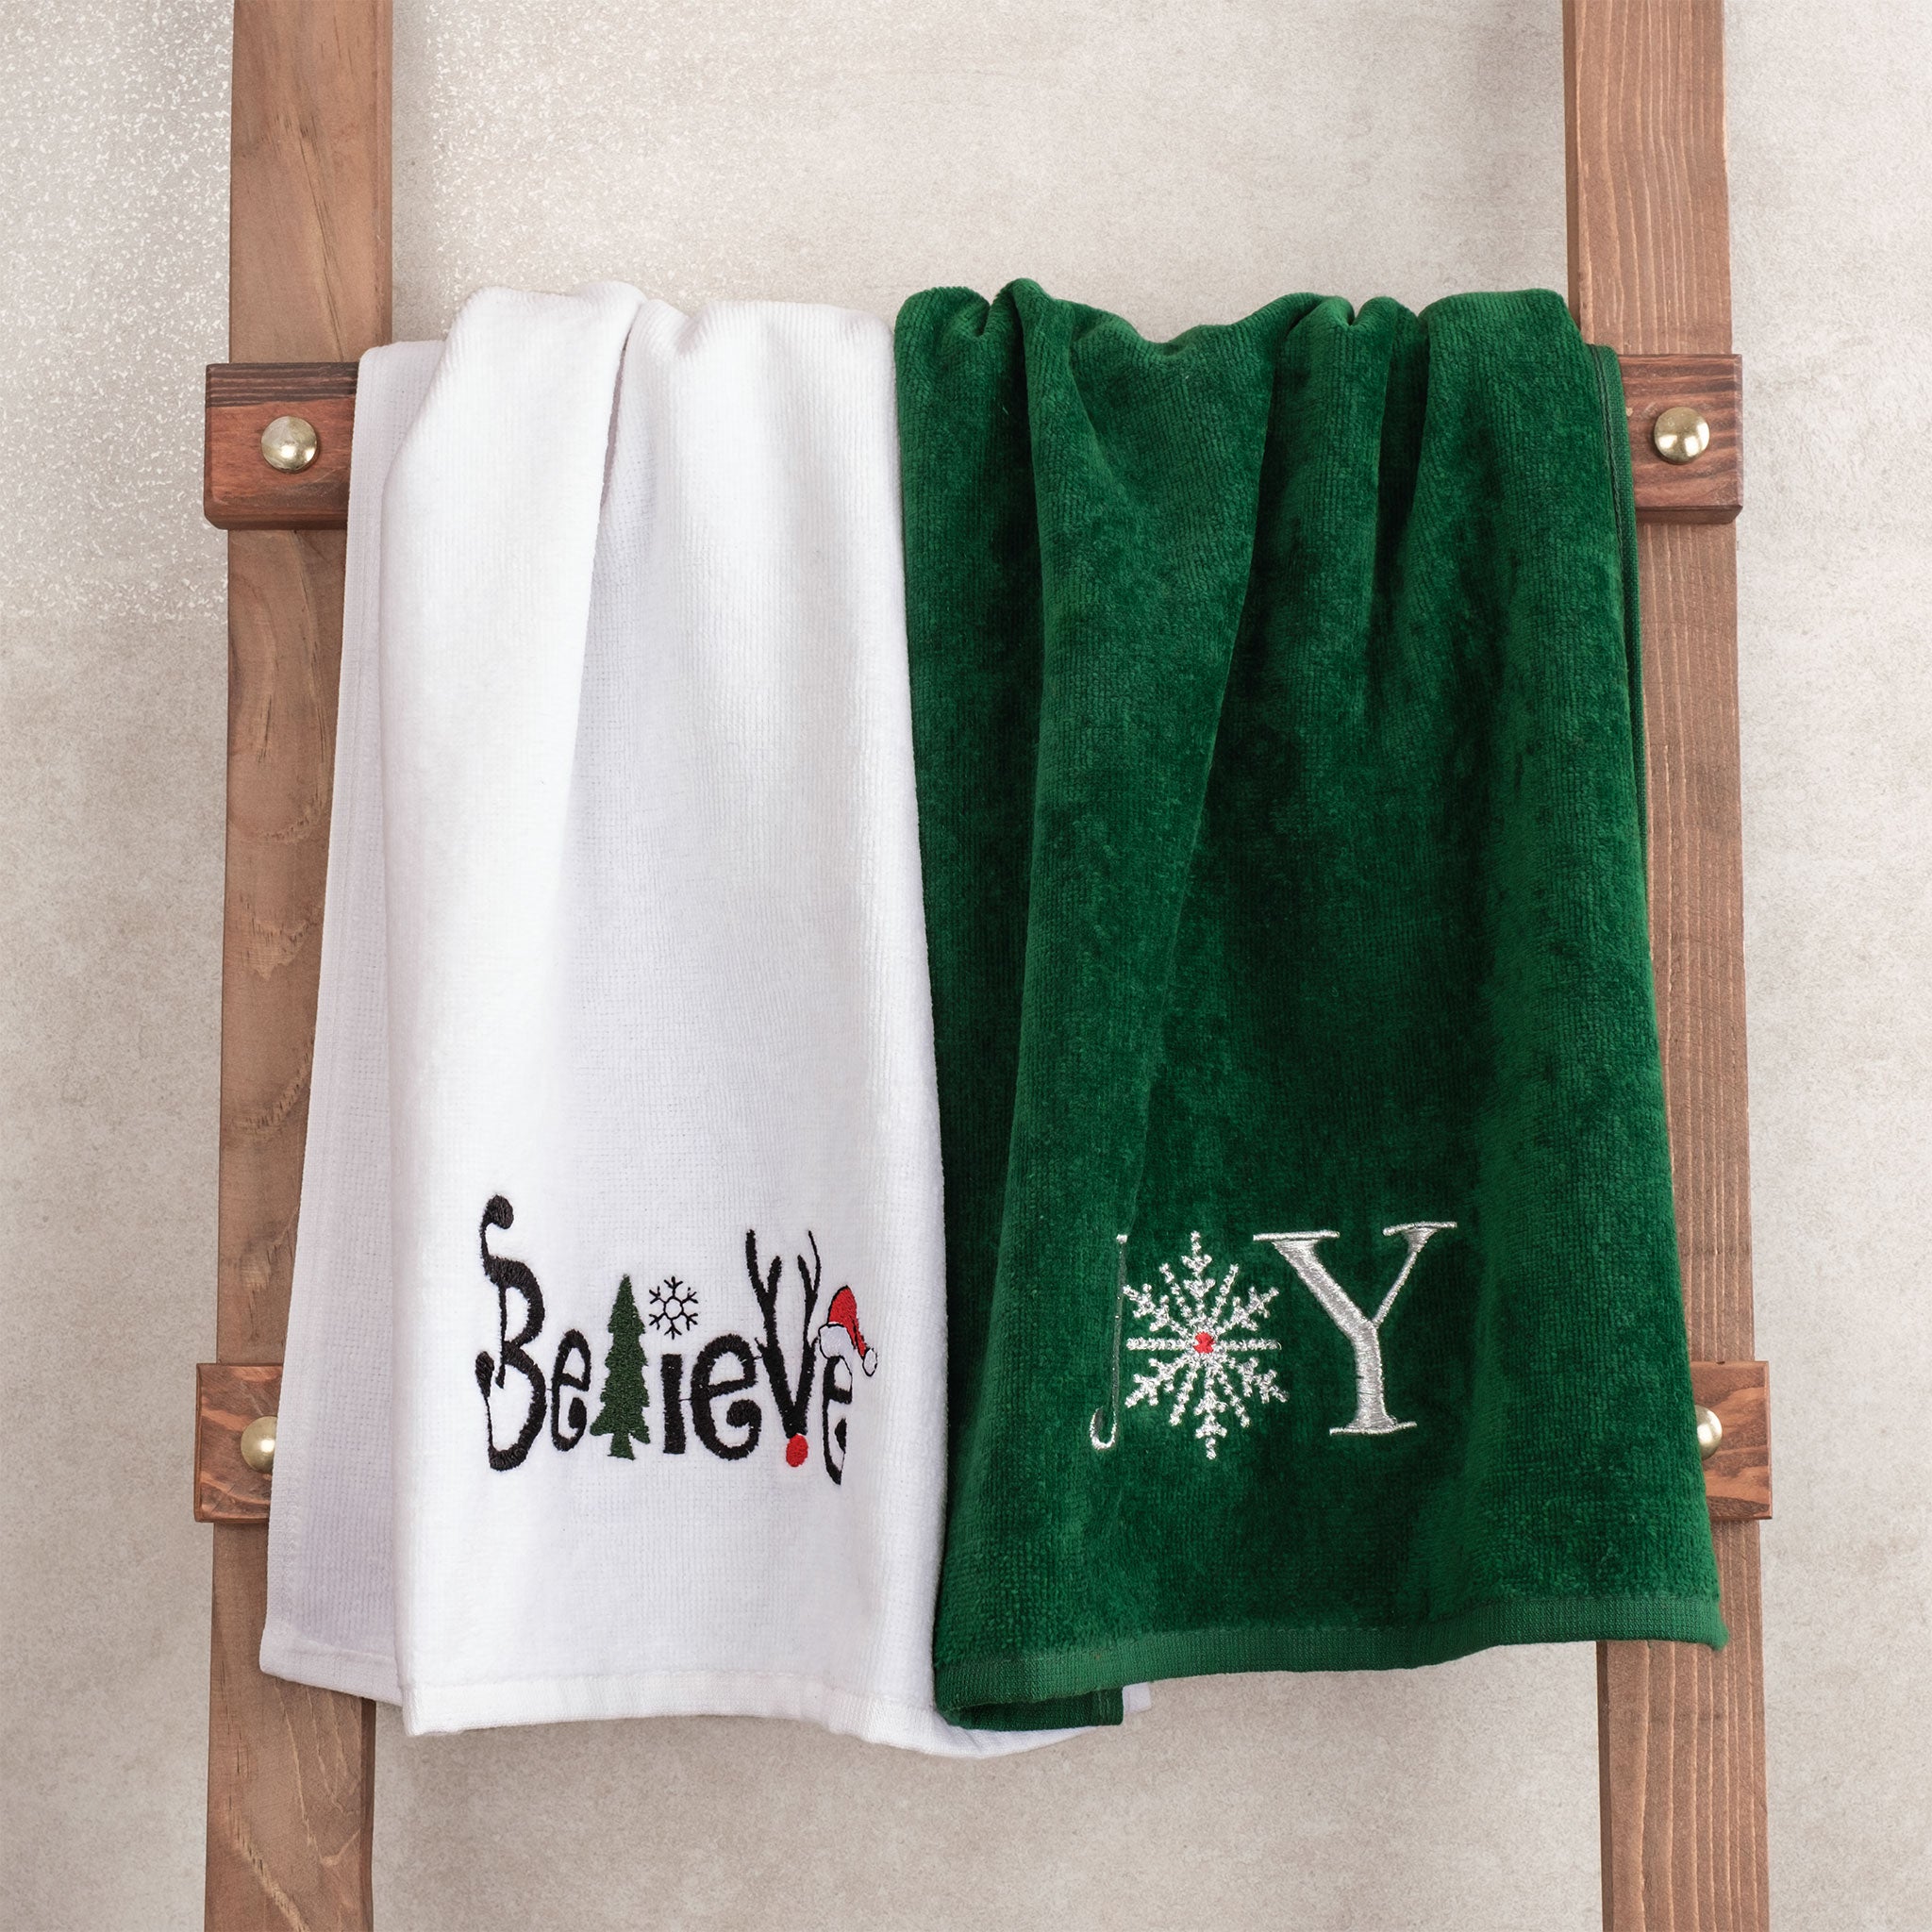 American Soft Linen - Christmas Towels 2  Packed Embroidered Towels for Decor Xmas - 60 Set Case Pack - Joy-Believe - 1